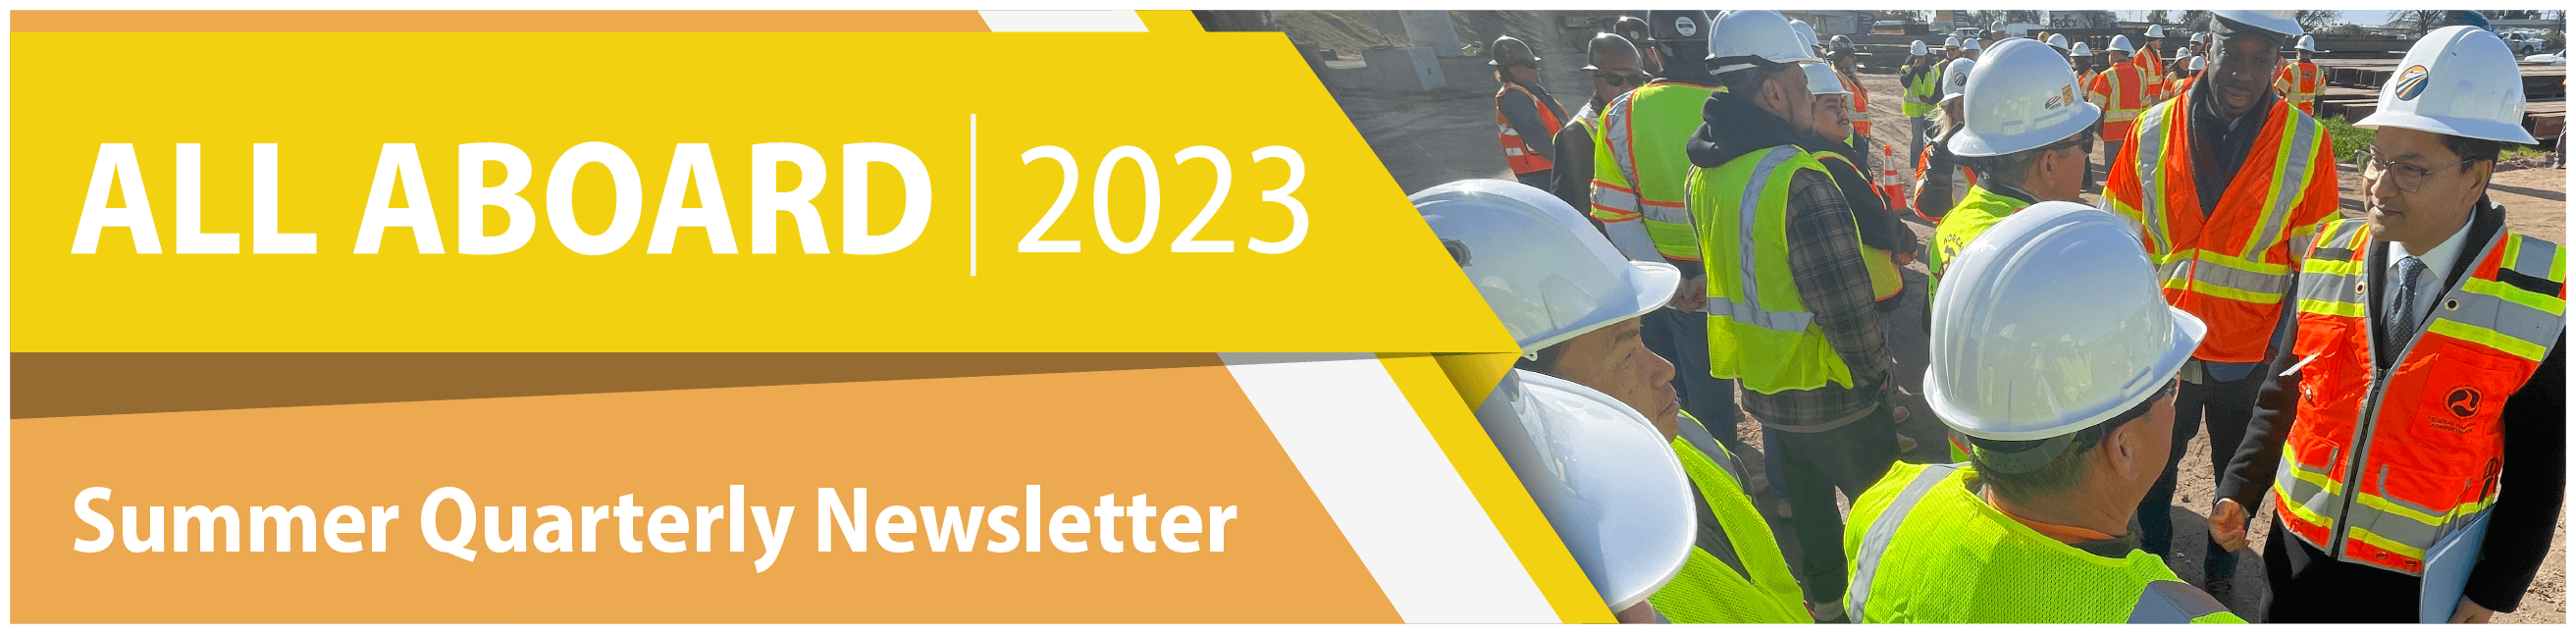 Banner image that reads All Aboard 2023 Summer Quarterly Newsletter. To the right of the text is a picture of many men in safety vests and construction helmets. Most of the men are facing away from the camera except for two. One of those men is wearing glasses and a dark suit and tie under his safety vest. The other, taller man facing the camera is wearing jeans, a scarf, and a zip up jacket. The day is sunny and set on a construction site with large and long metal objects in the background.